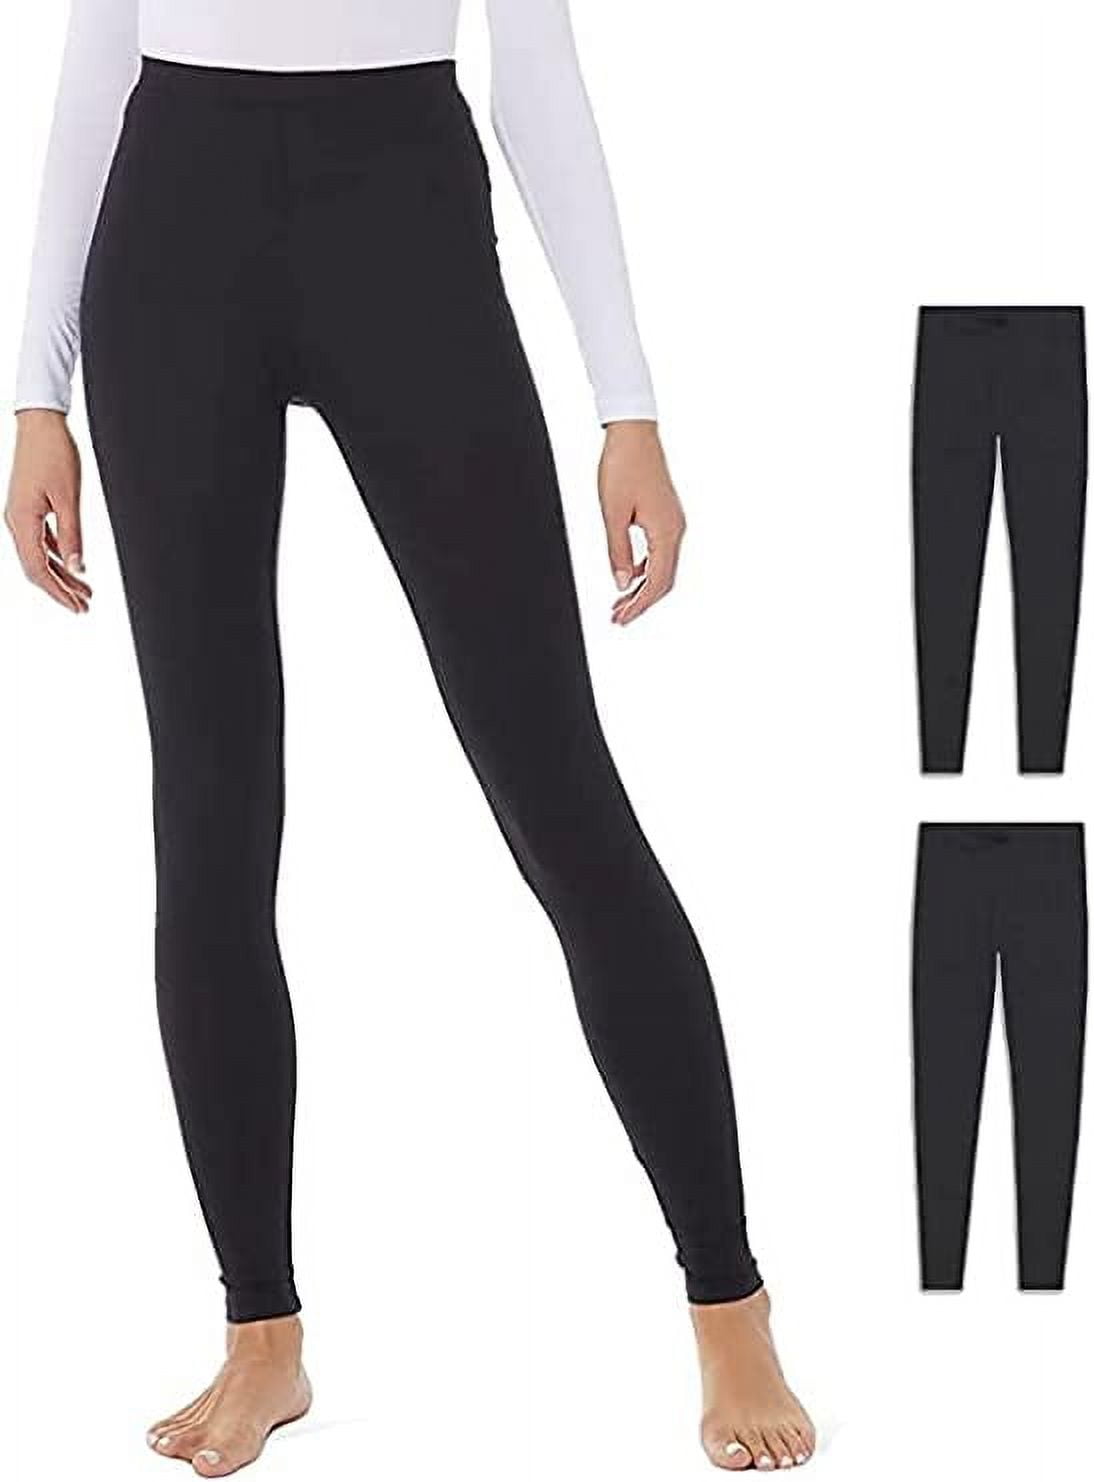 Brand Clearance! Men's Thermal Compression Pants Athletic Sports